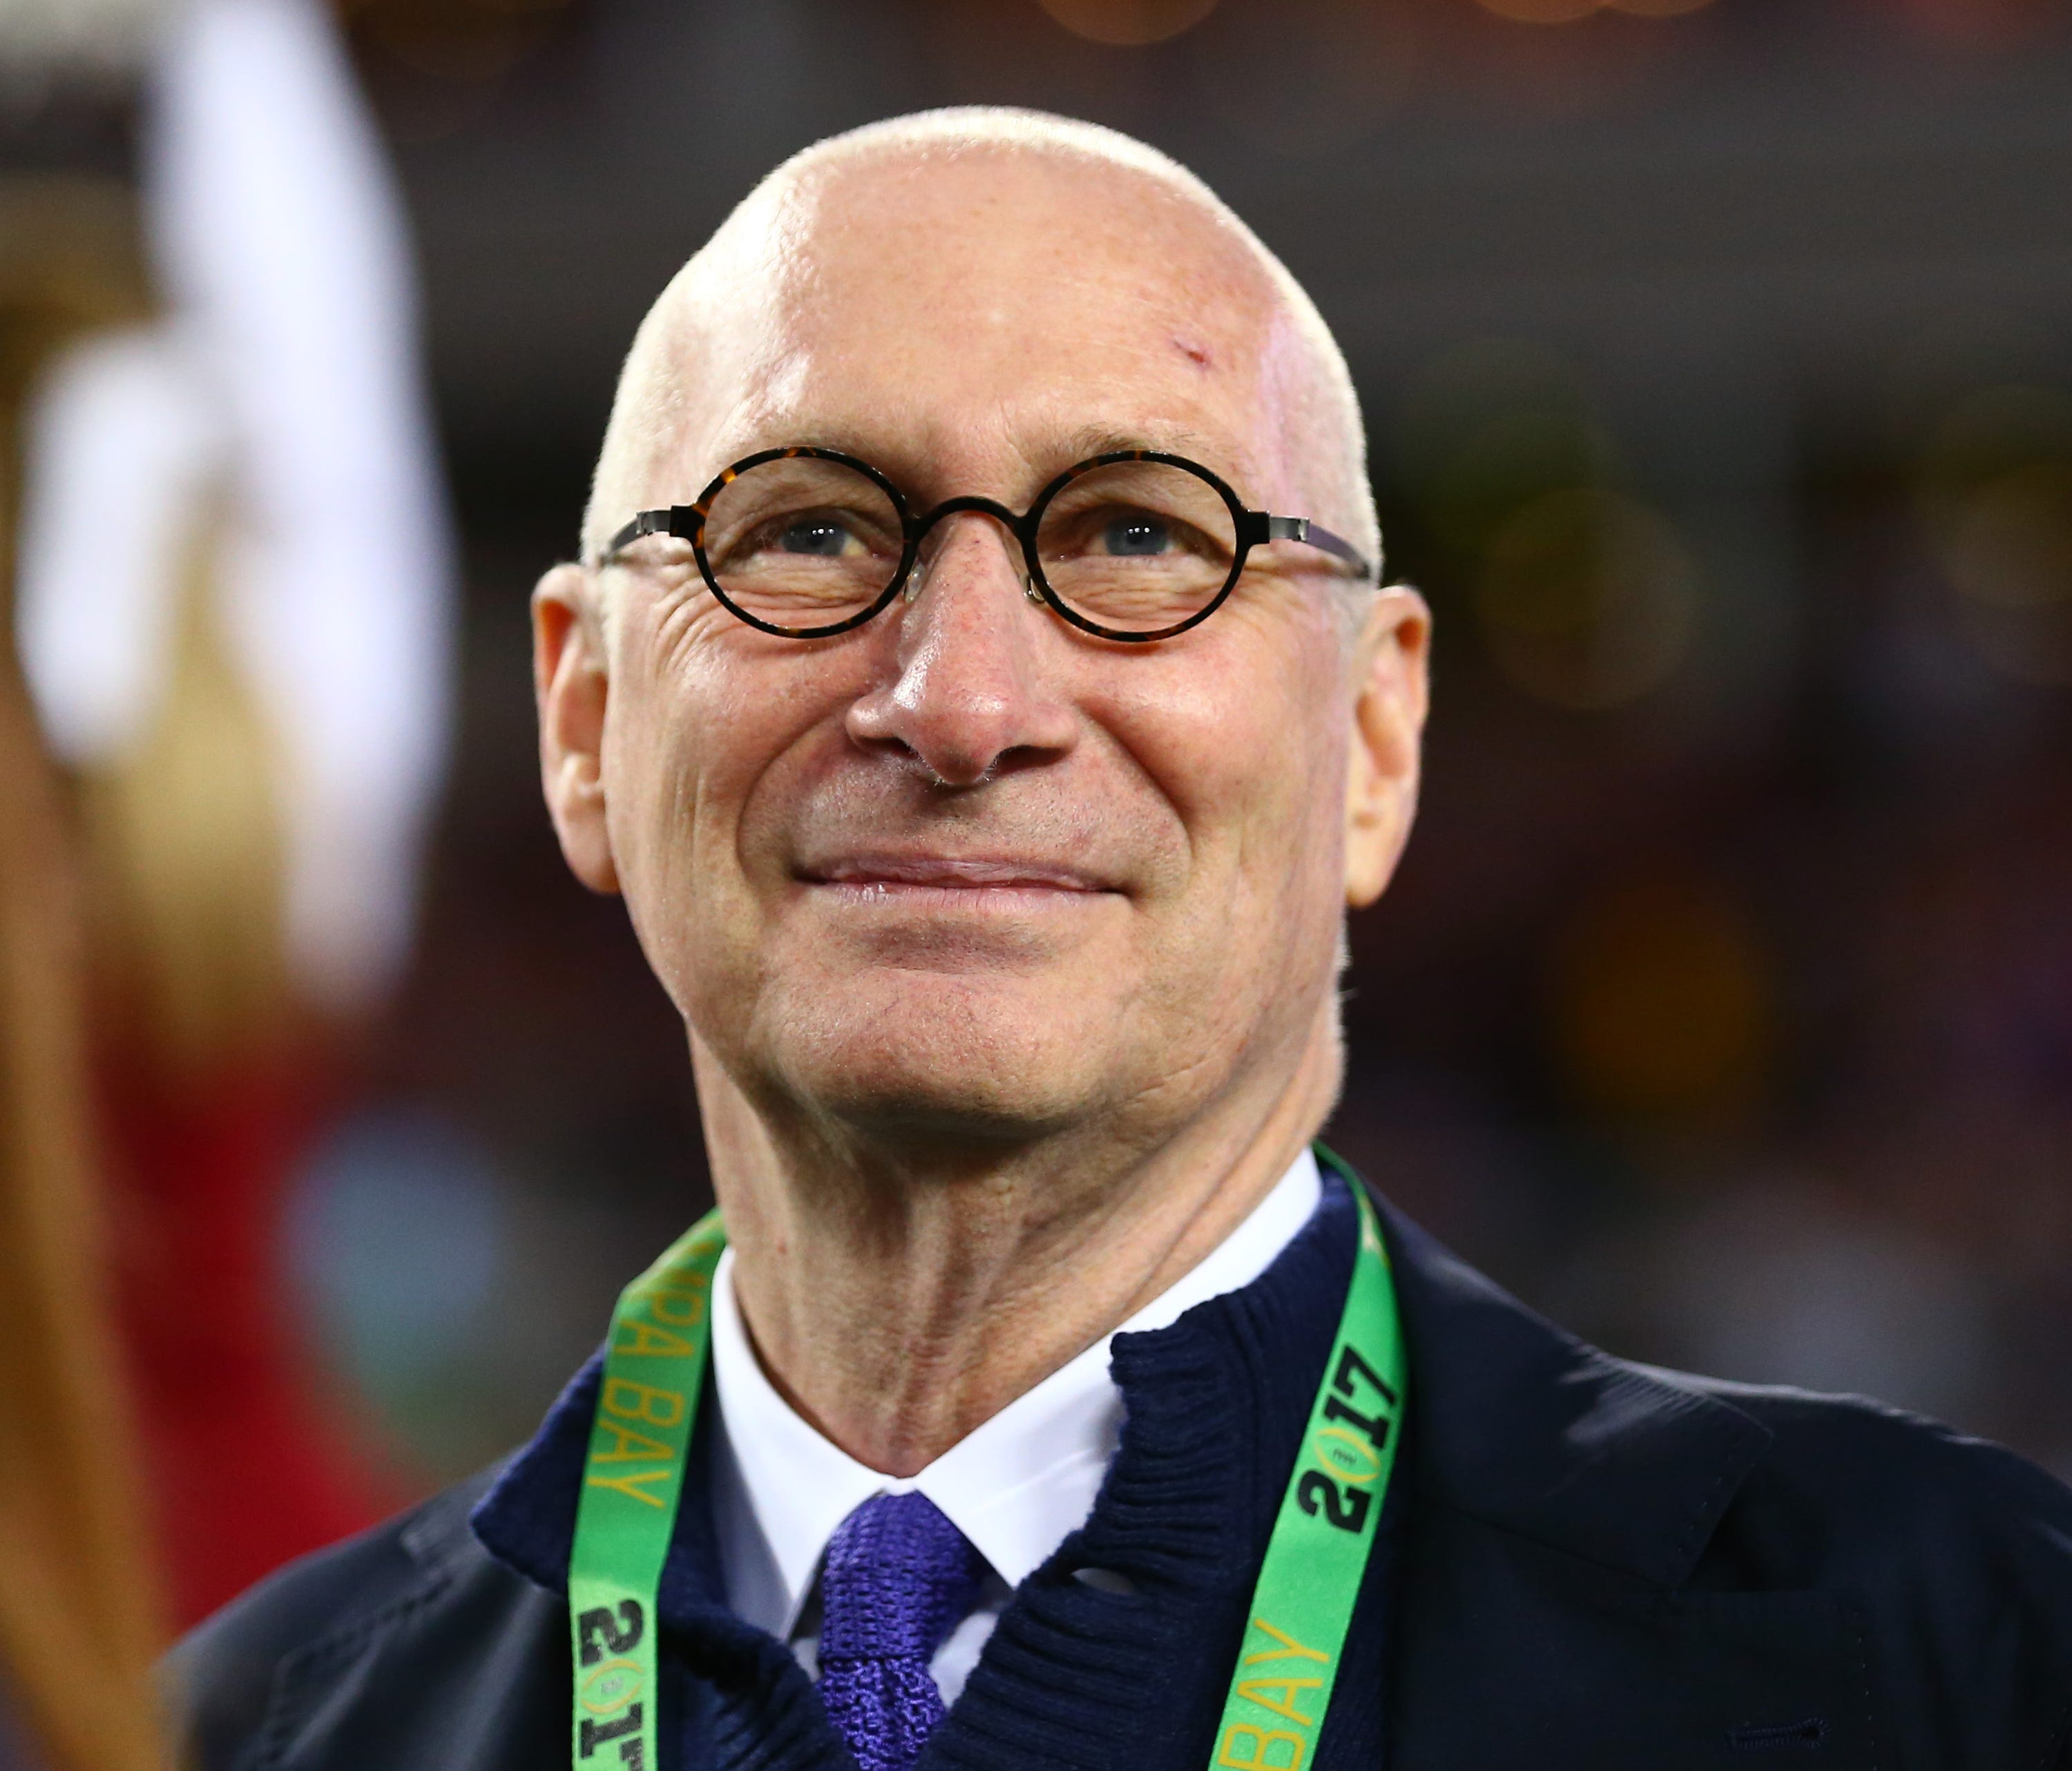 Former ESPN president John Skipper during the 2017 College Football Playoff National Championship Game.